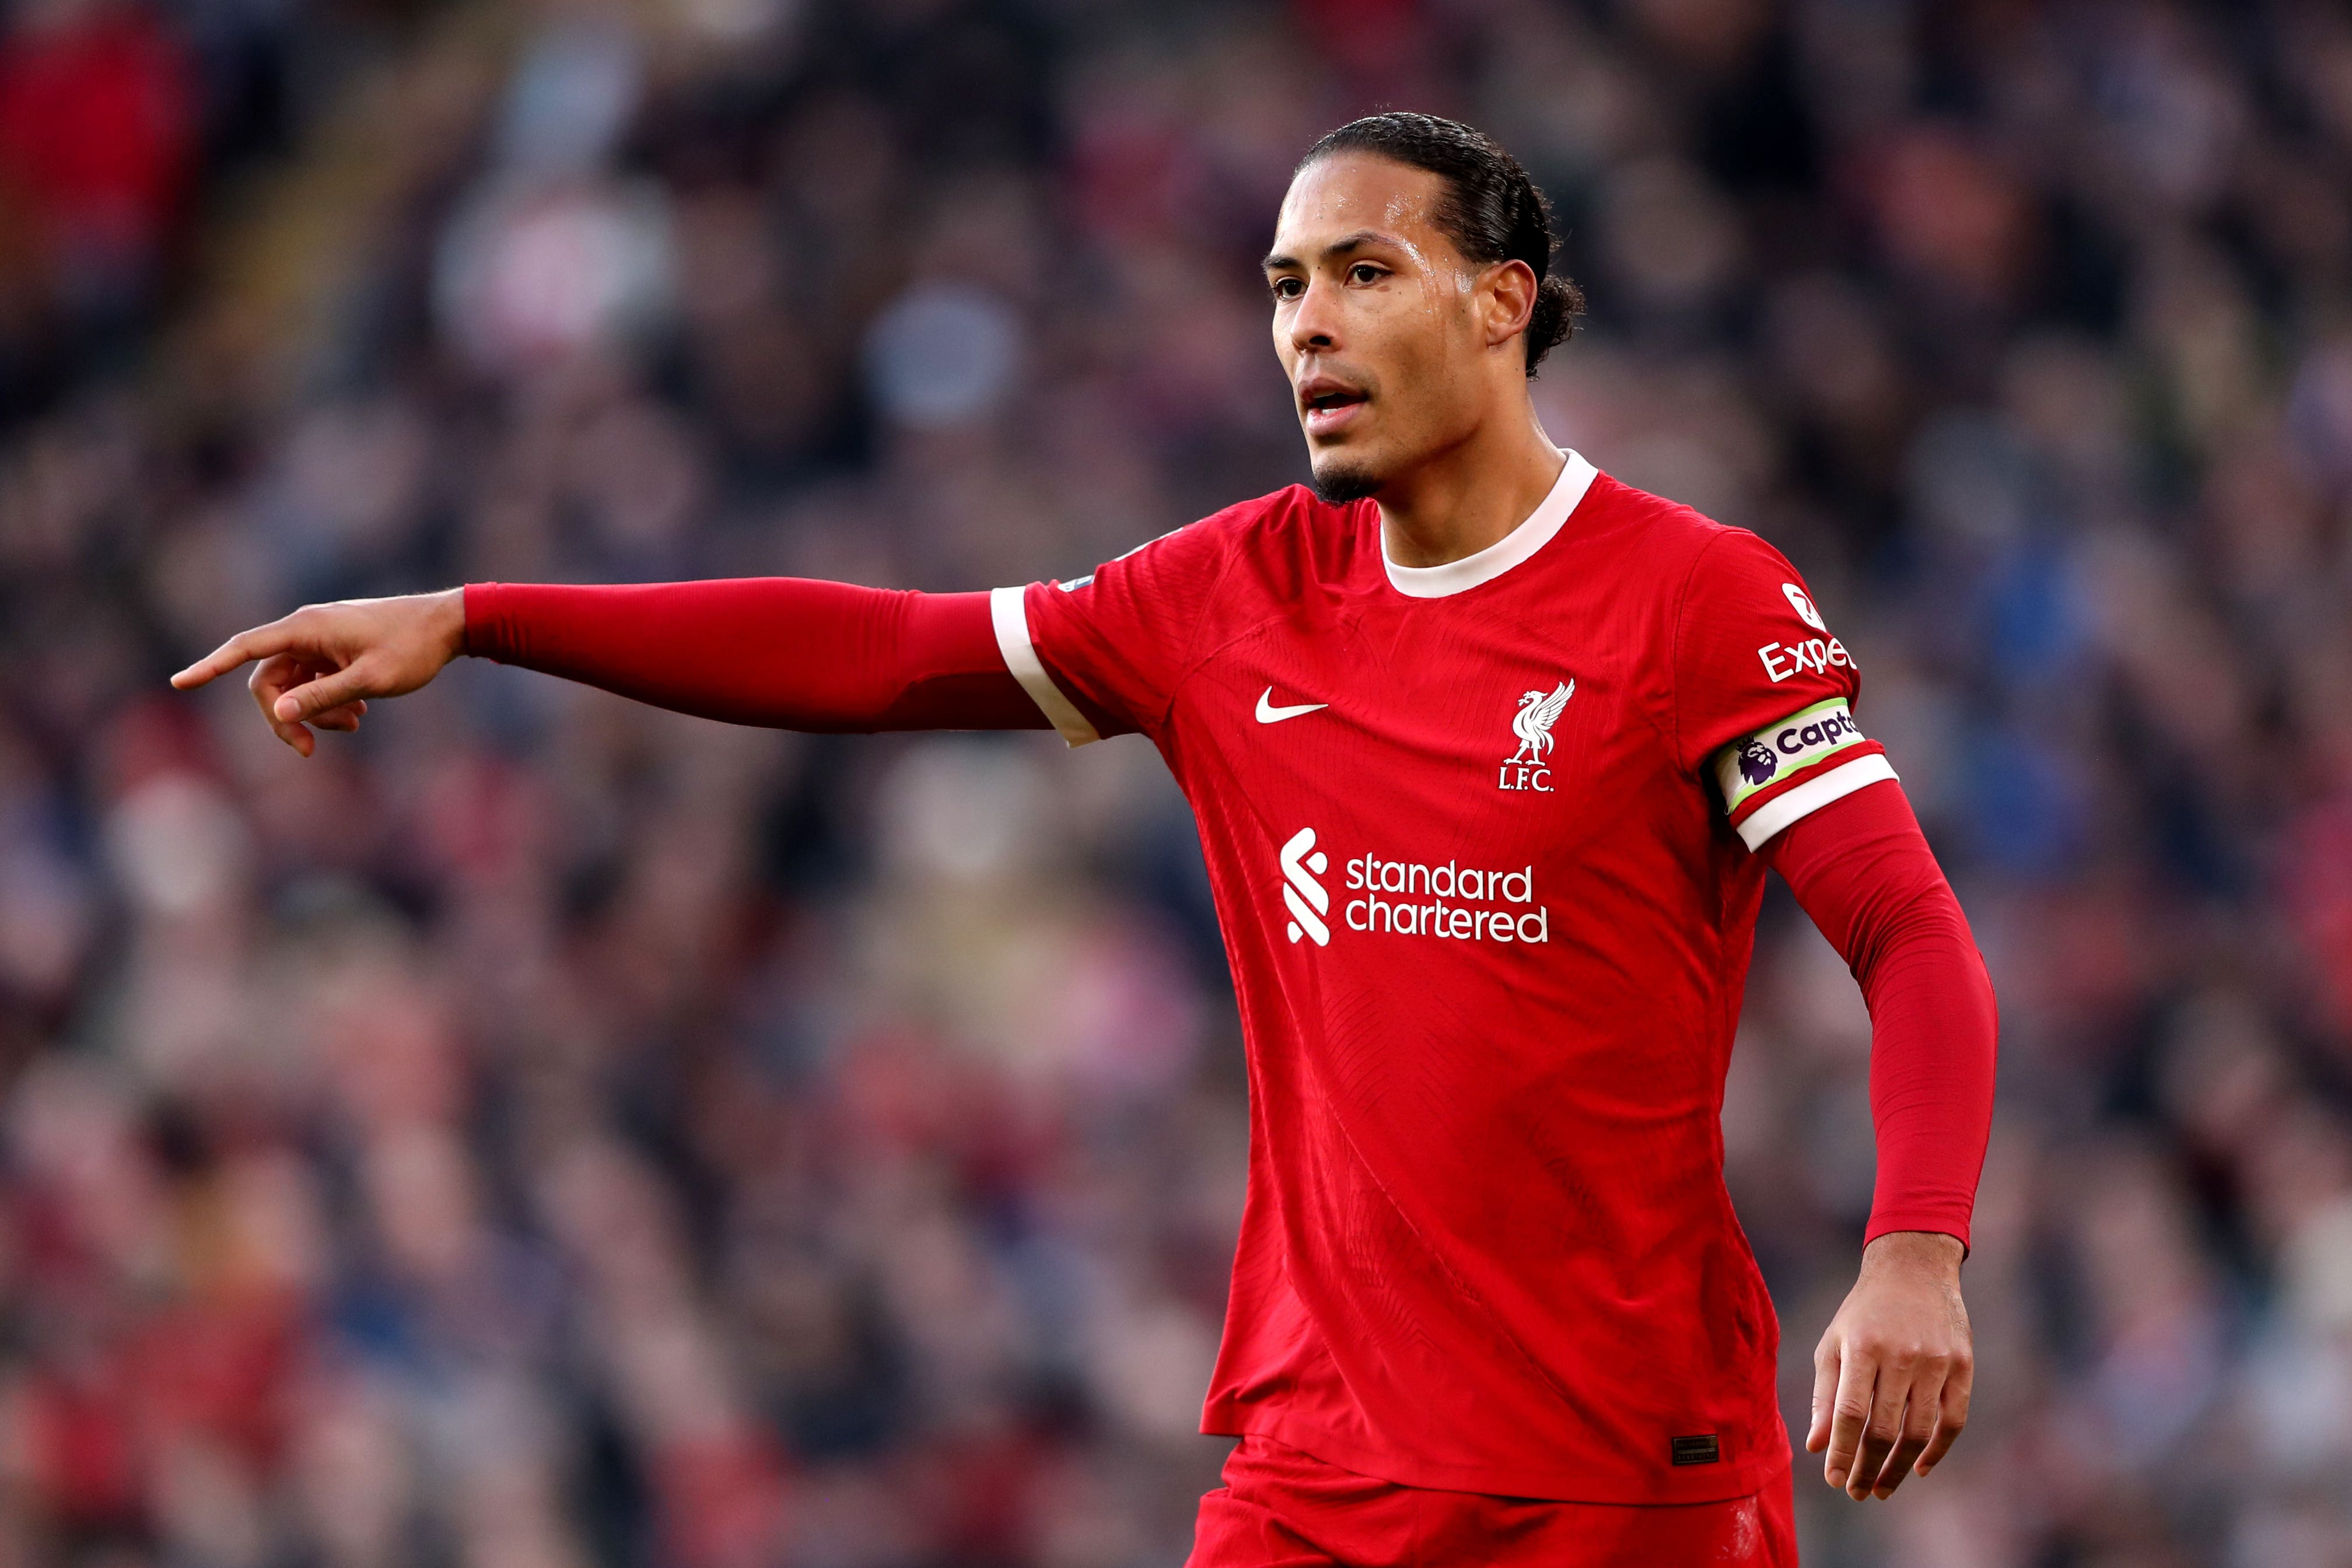 Liverpool’s Virgil van Dijk has emphasised his commitment to the club